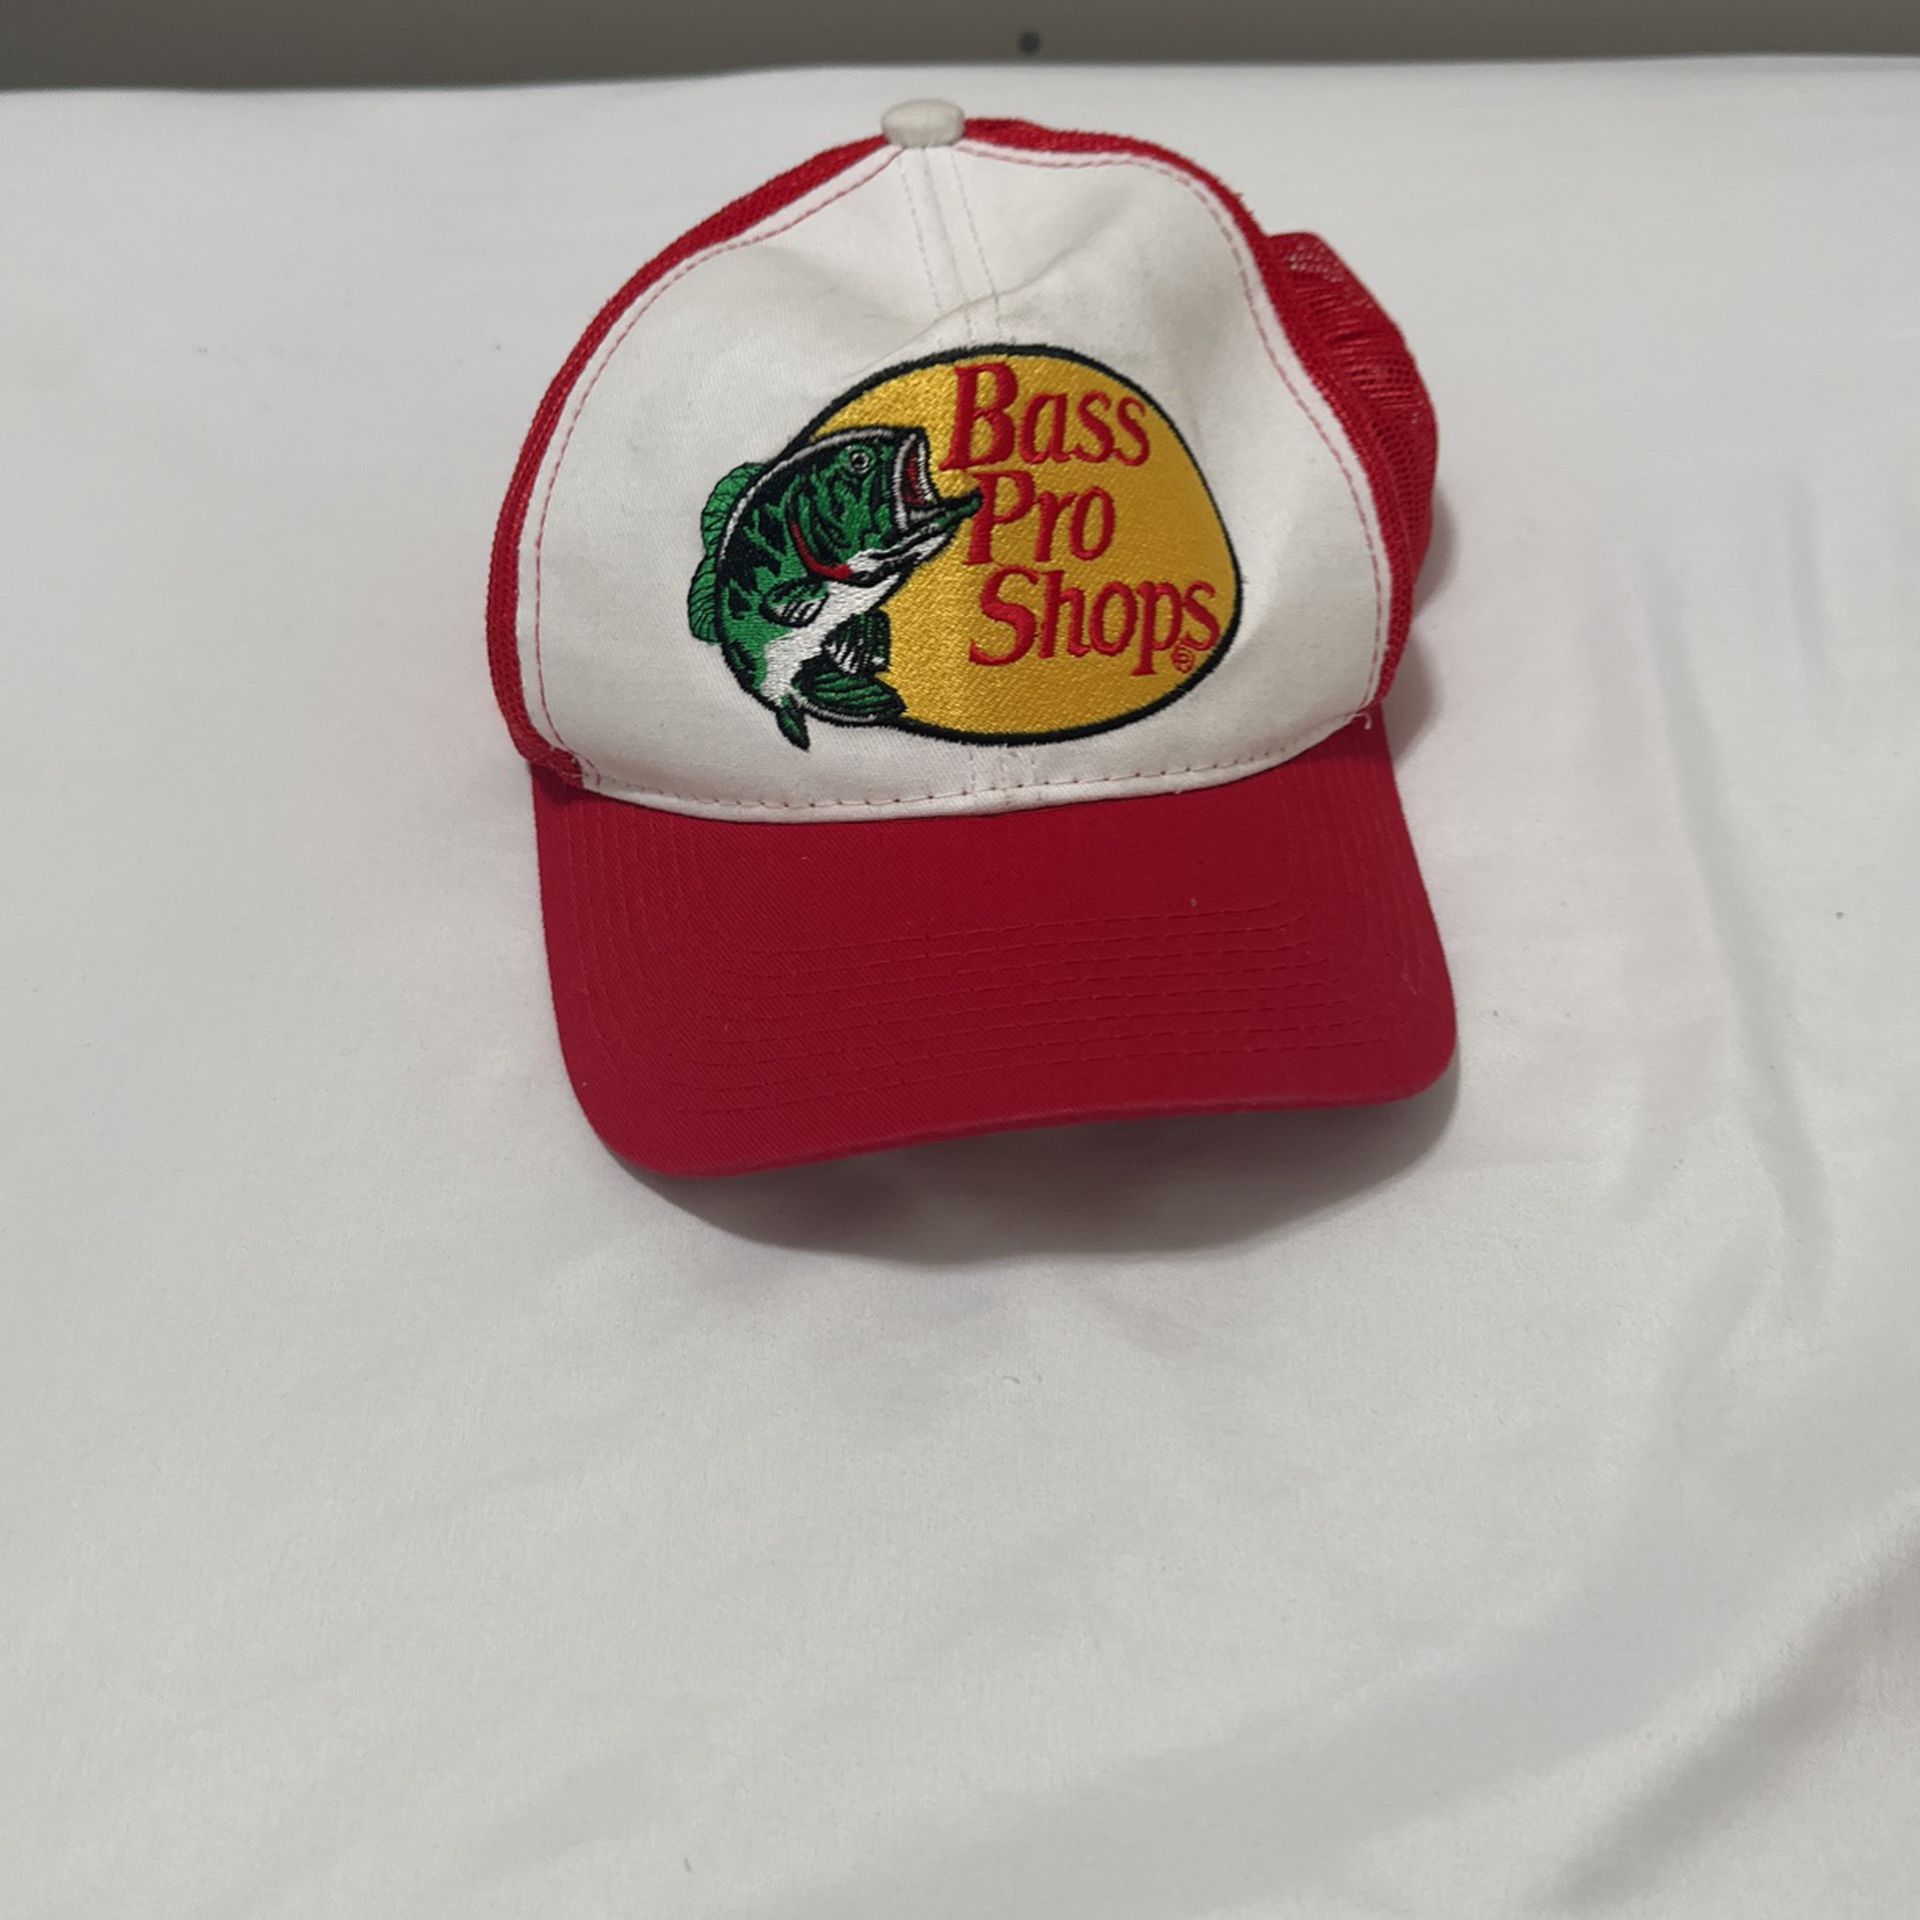 Bass Pro Shop Hats for Sale in Calexico, CA - OfferUp